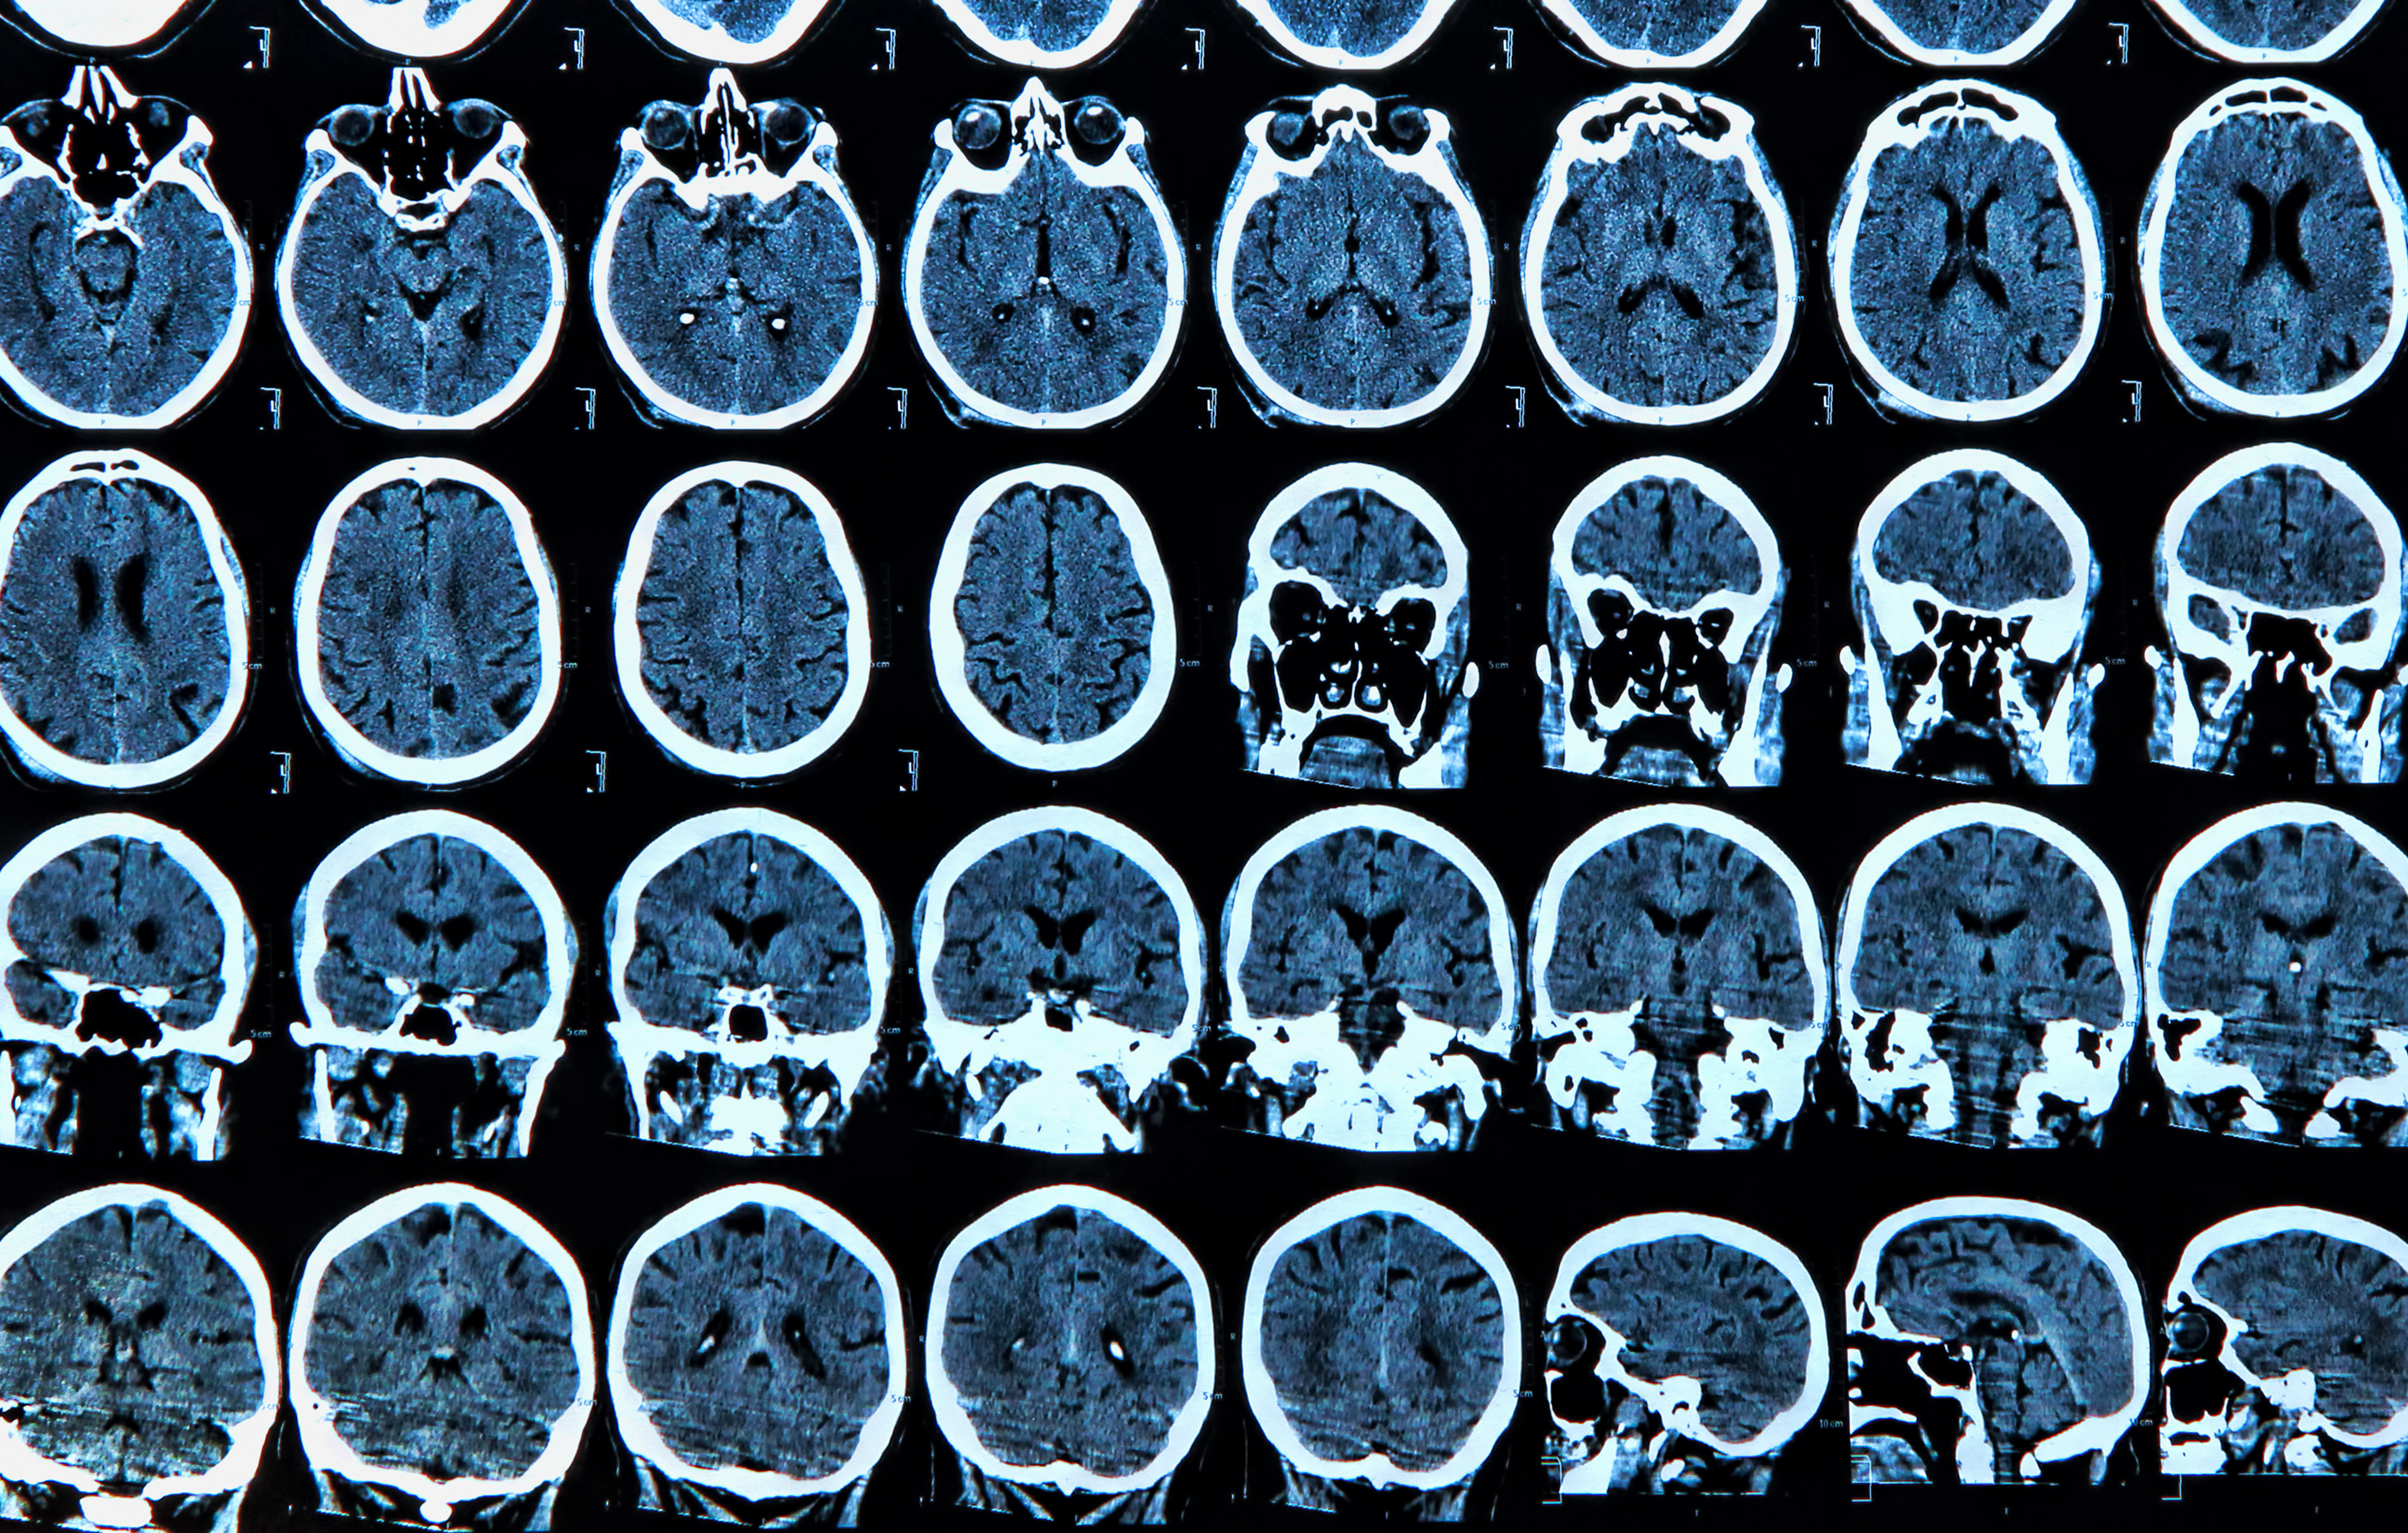 New Study Shows Link Between COVID-19 and Elevated Risks for Neurological Disorders